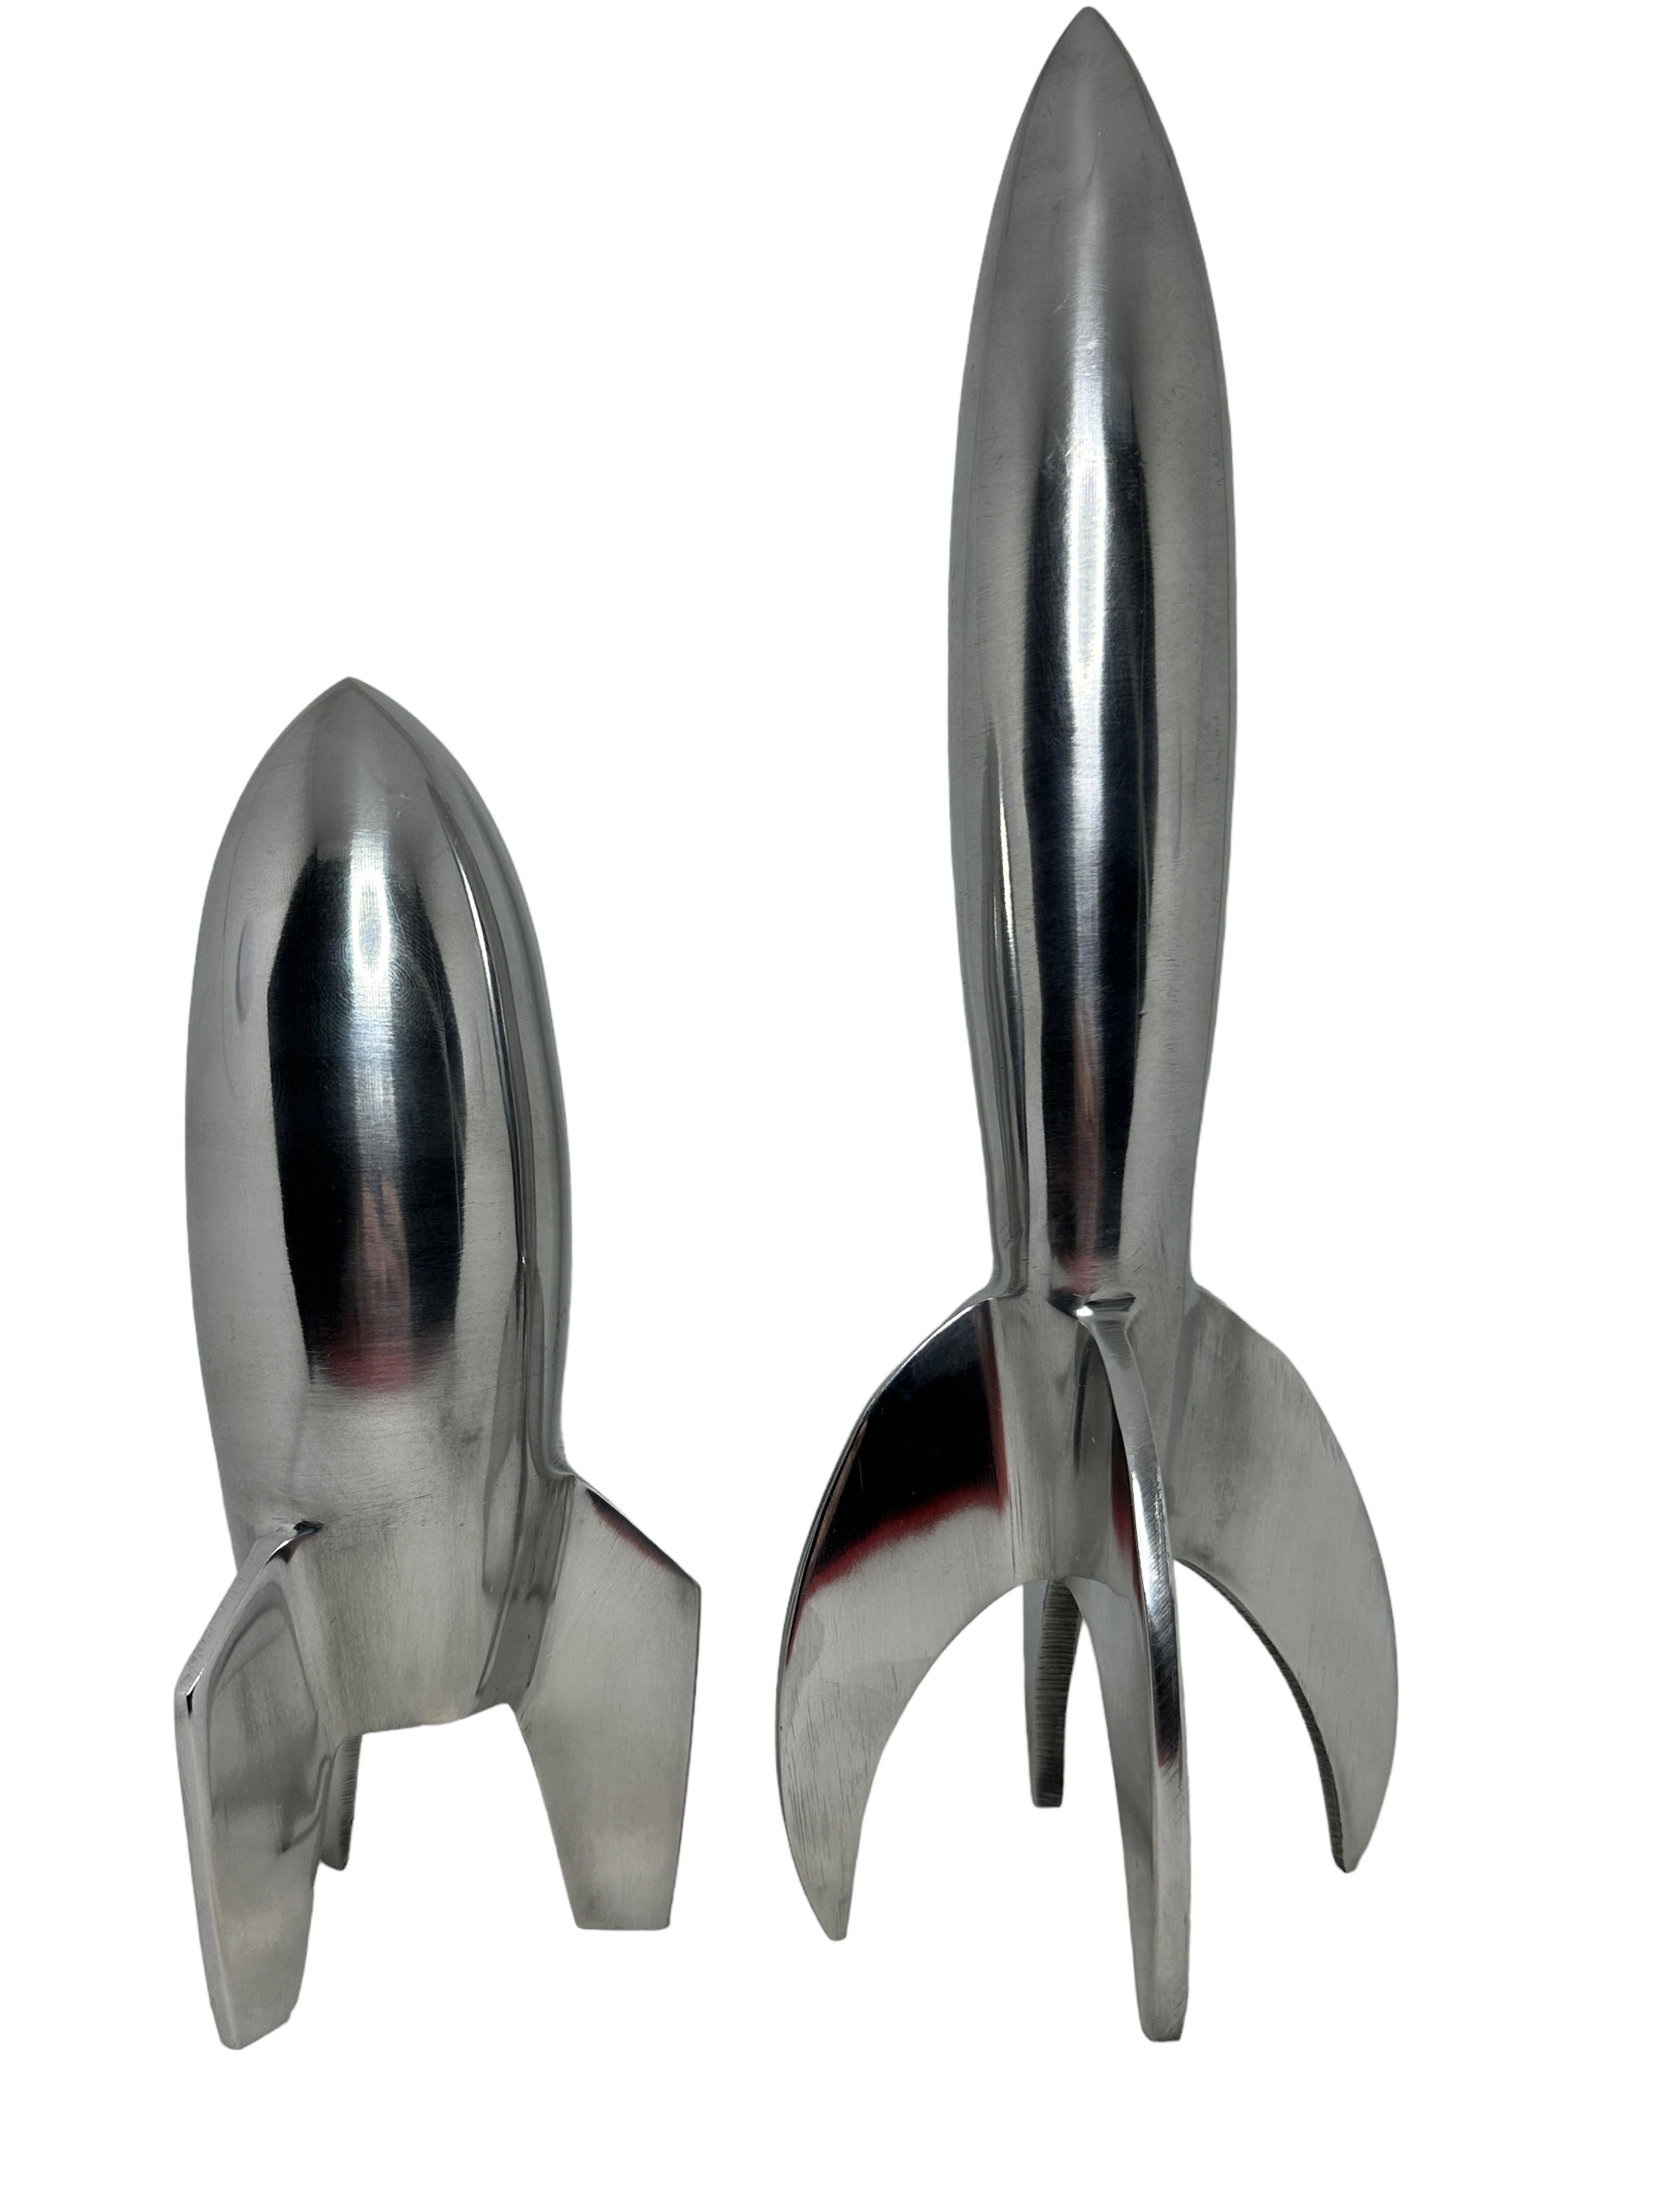 Scaled model of two Rocket statues. Hand-spun in metal. A nice architectural sculpture for every living room or console table. Tallest measures approximate 11.5